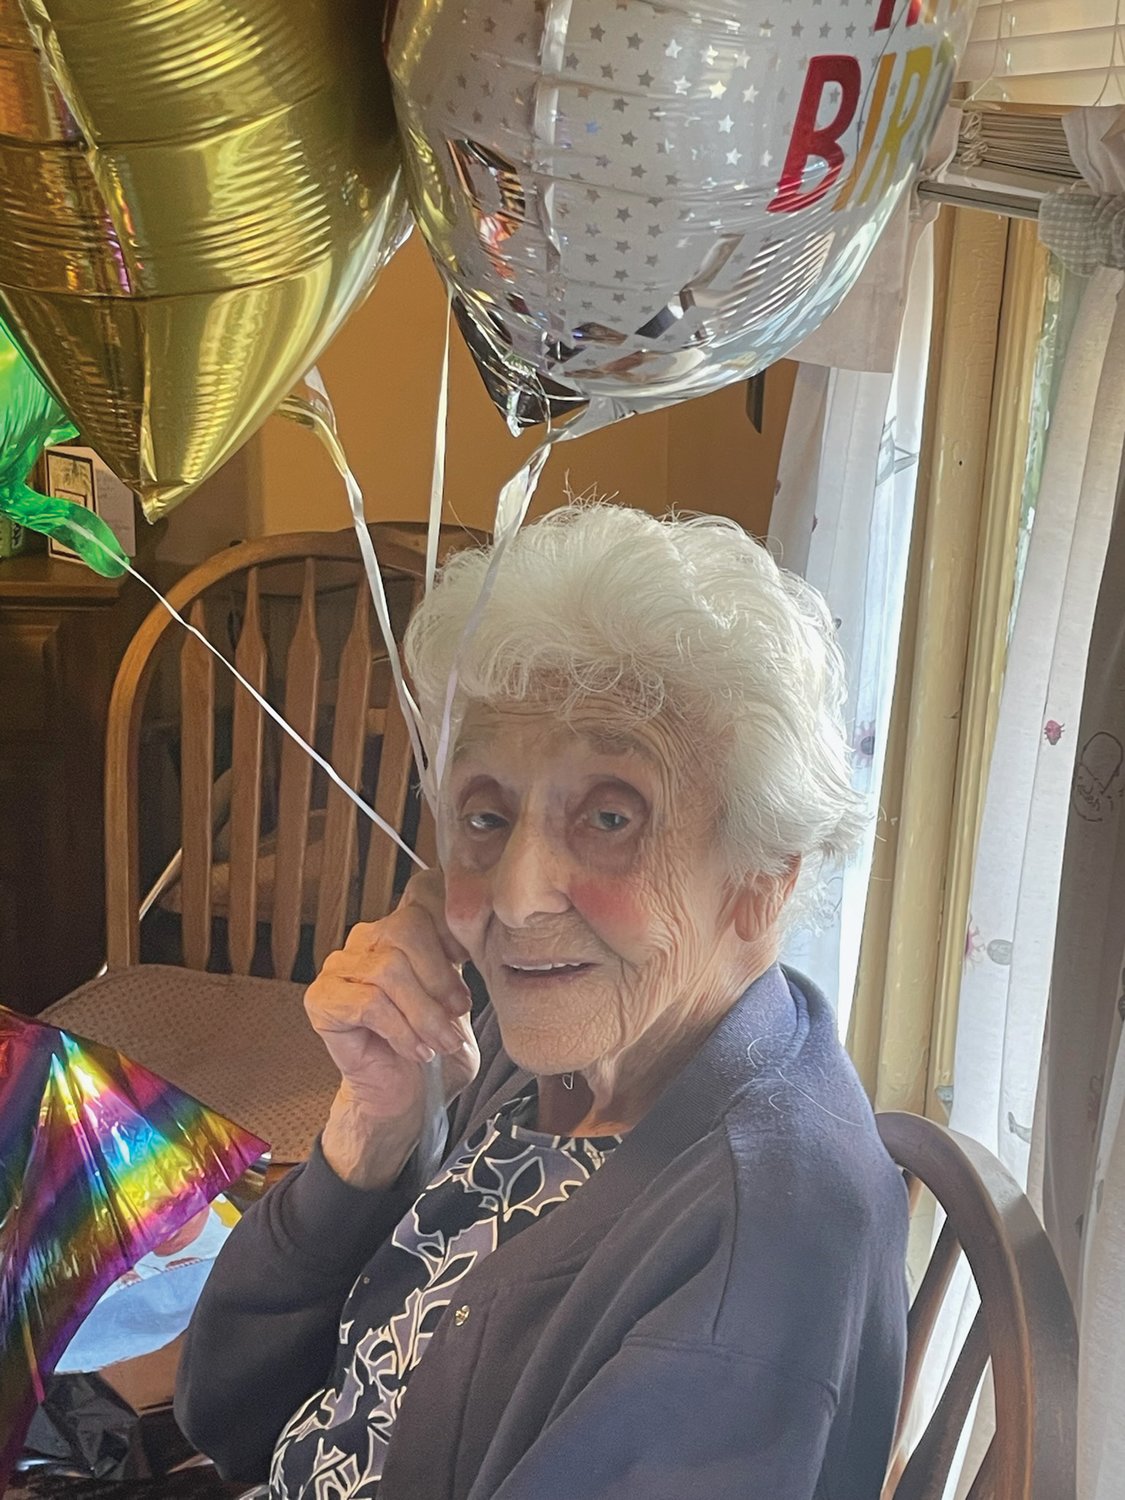 BIG PARTY: On Sunday, about 25 friends and family packed Celentano’s Binghampton Avenue home, where she’s lived her entire life, for a 100th birthday celebration.